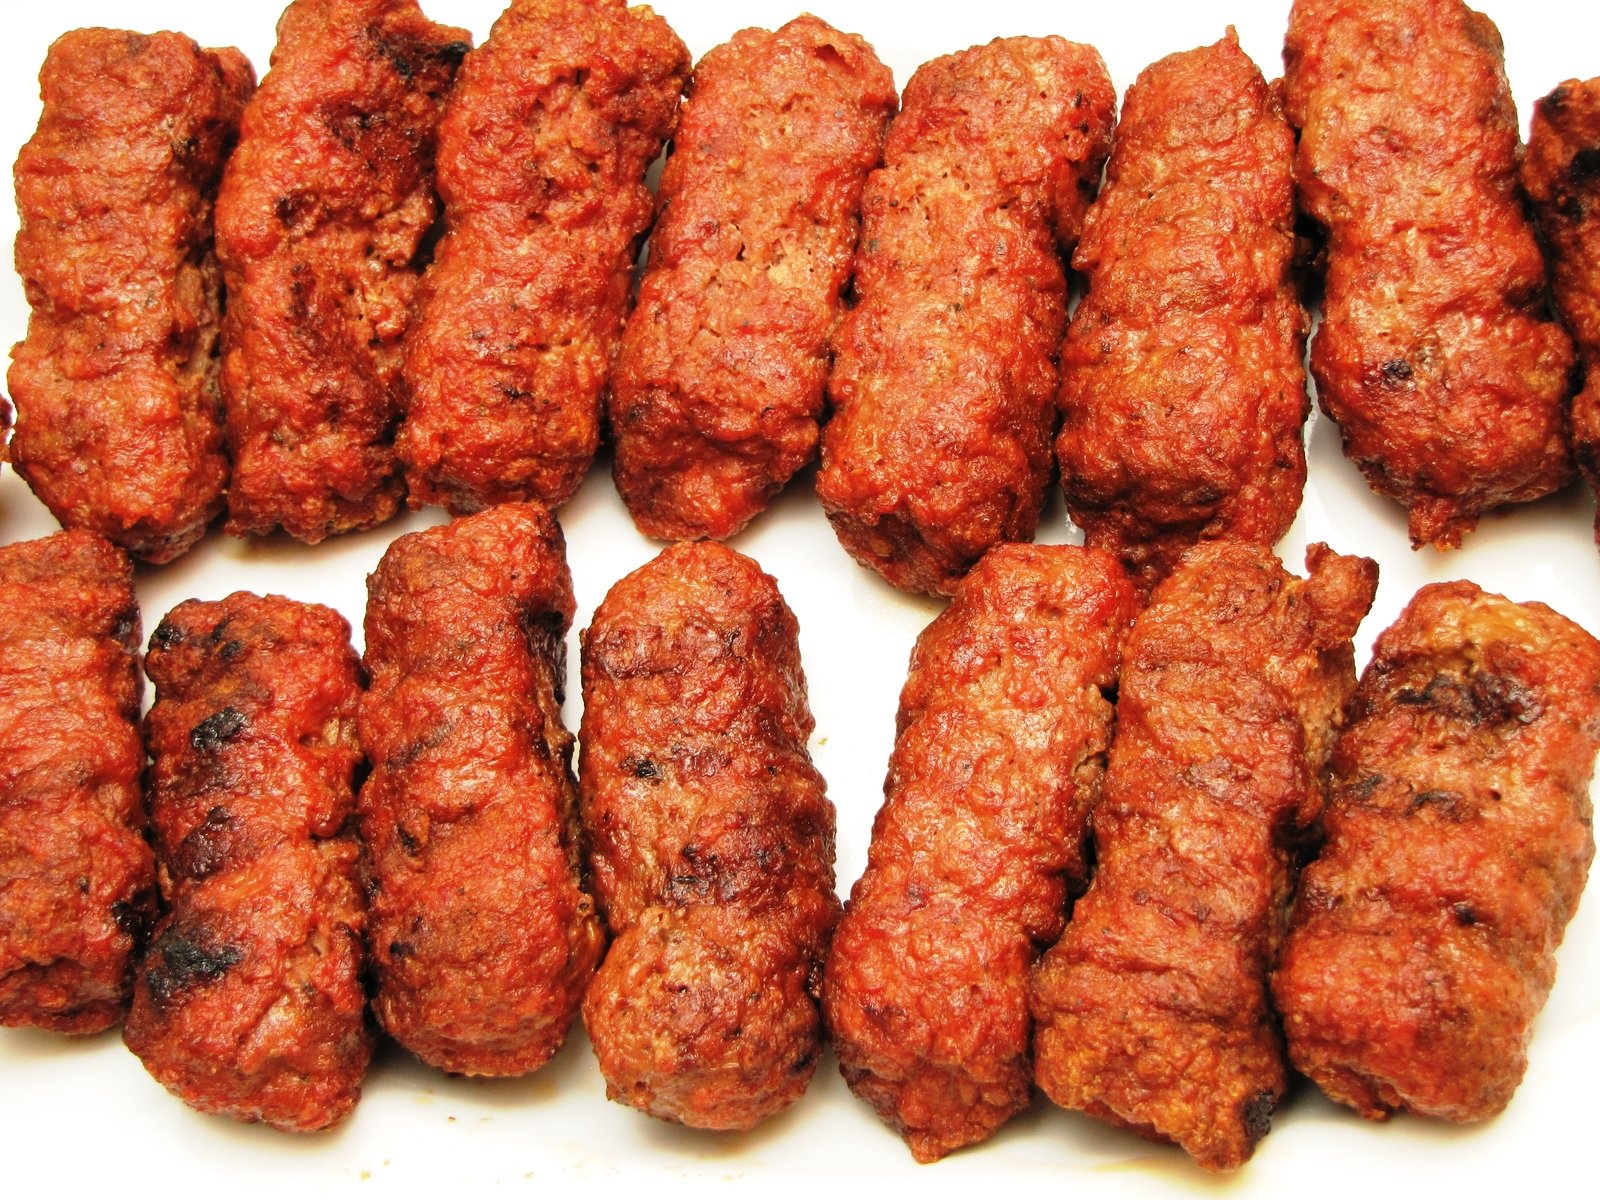 meat on skewers with a white background